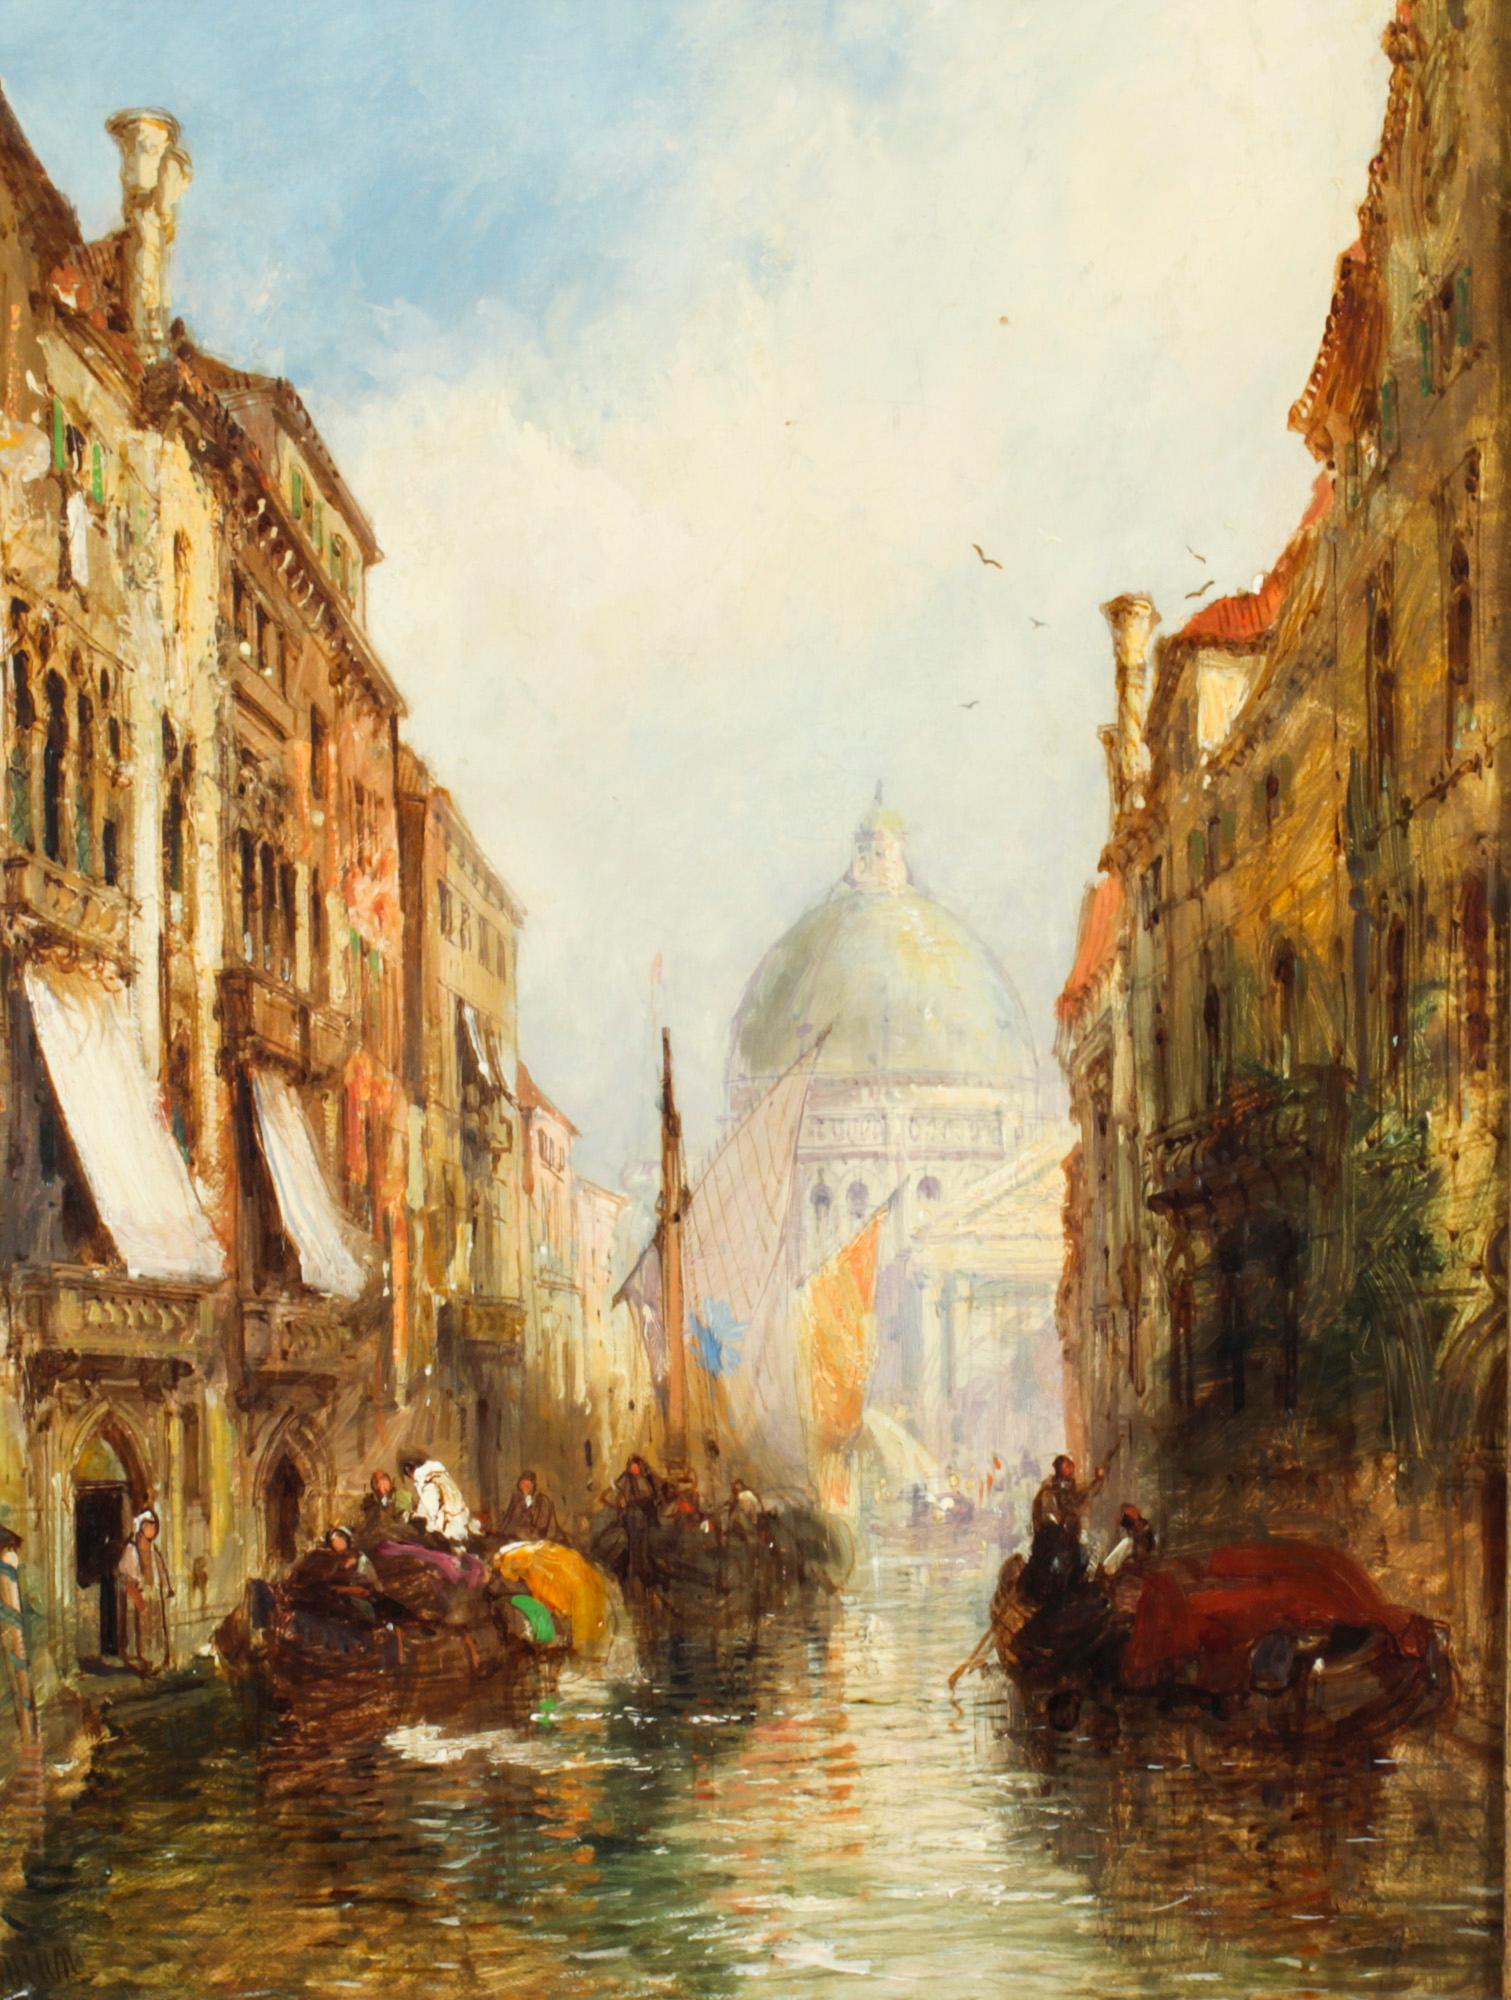 This is a beautiful oil on canvas painting by Jane Vivian (Active 1869-1890) signed on the lower left.

The painting delightfully presents the view of a Venetian canal and a beautiful perspective of San Simeone Piccolo in the distance. The artist